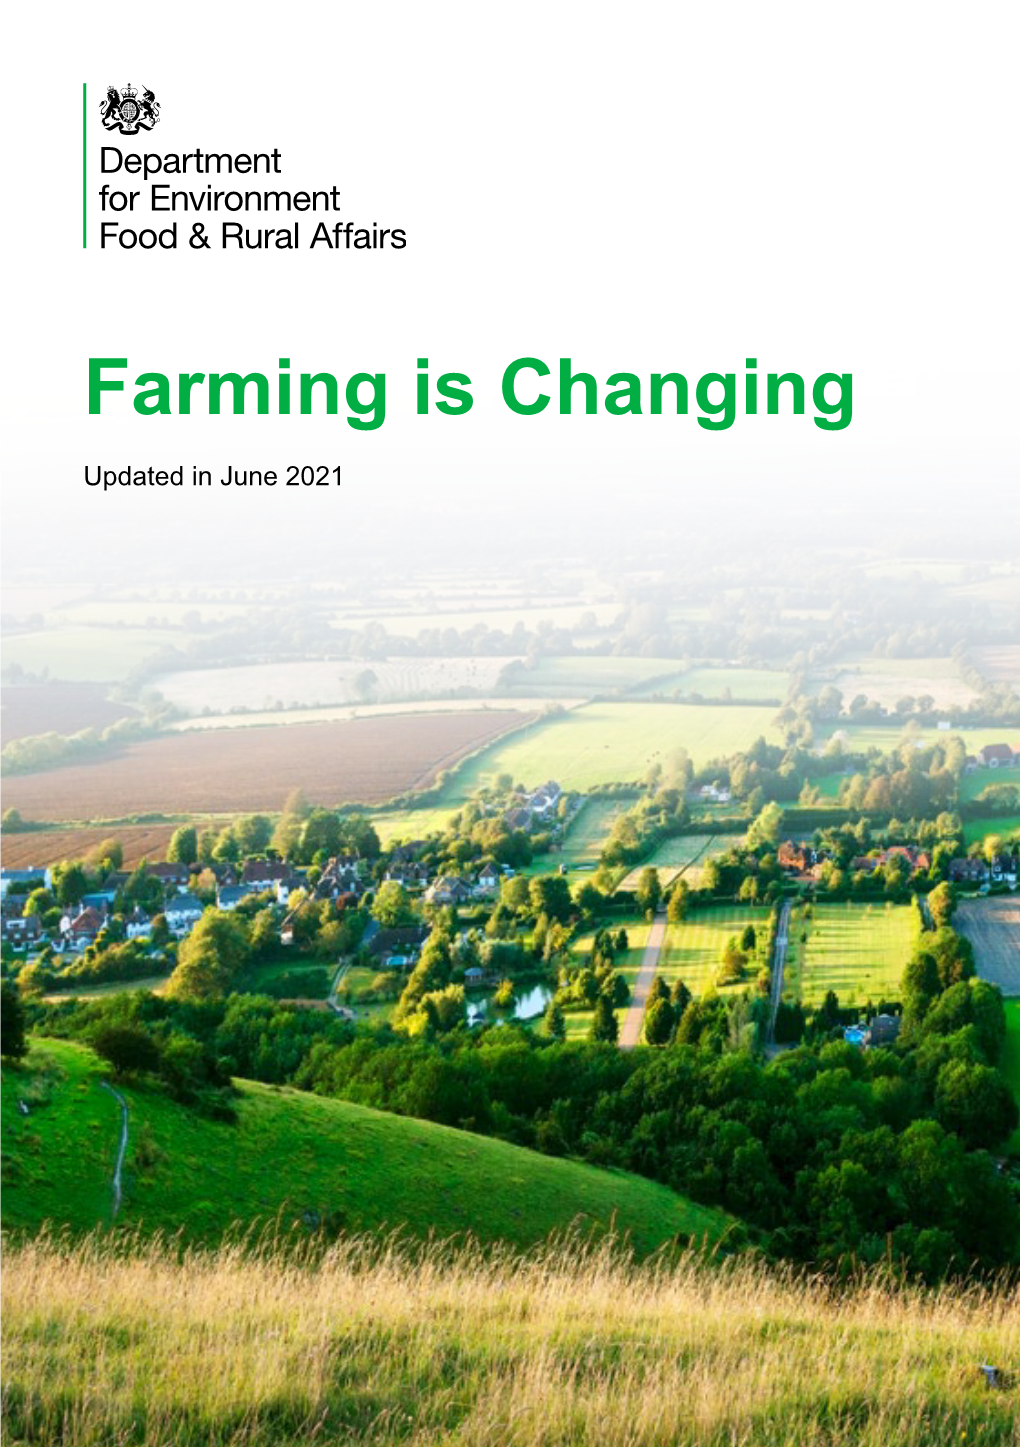 Farming Is Changing Updated in June 2021